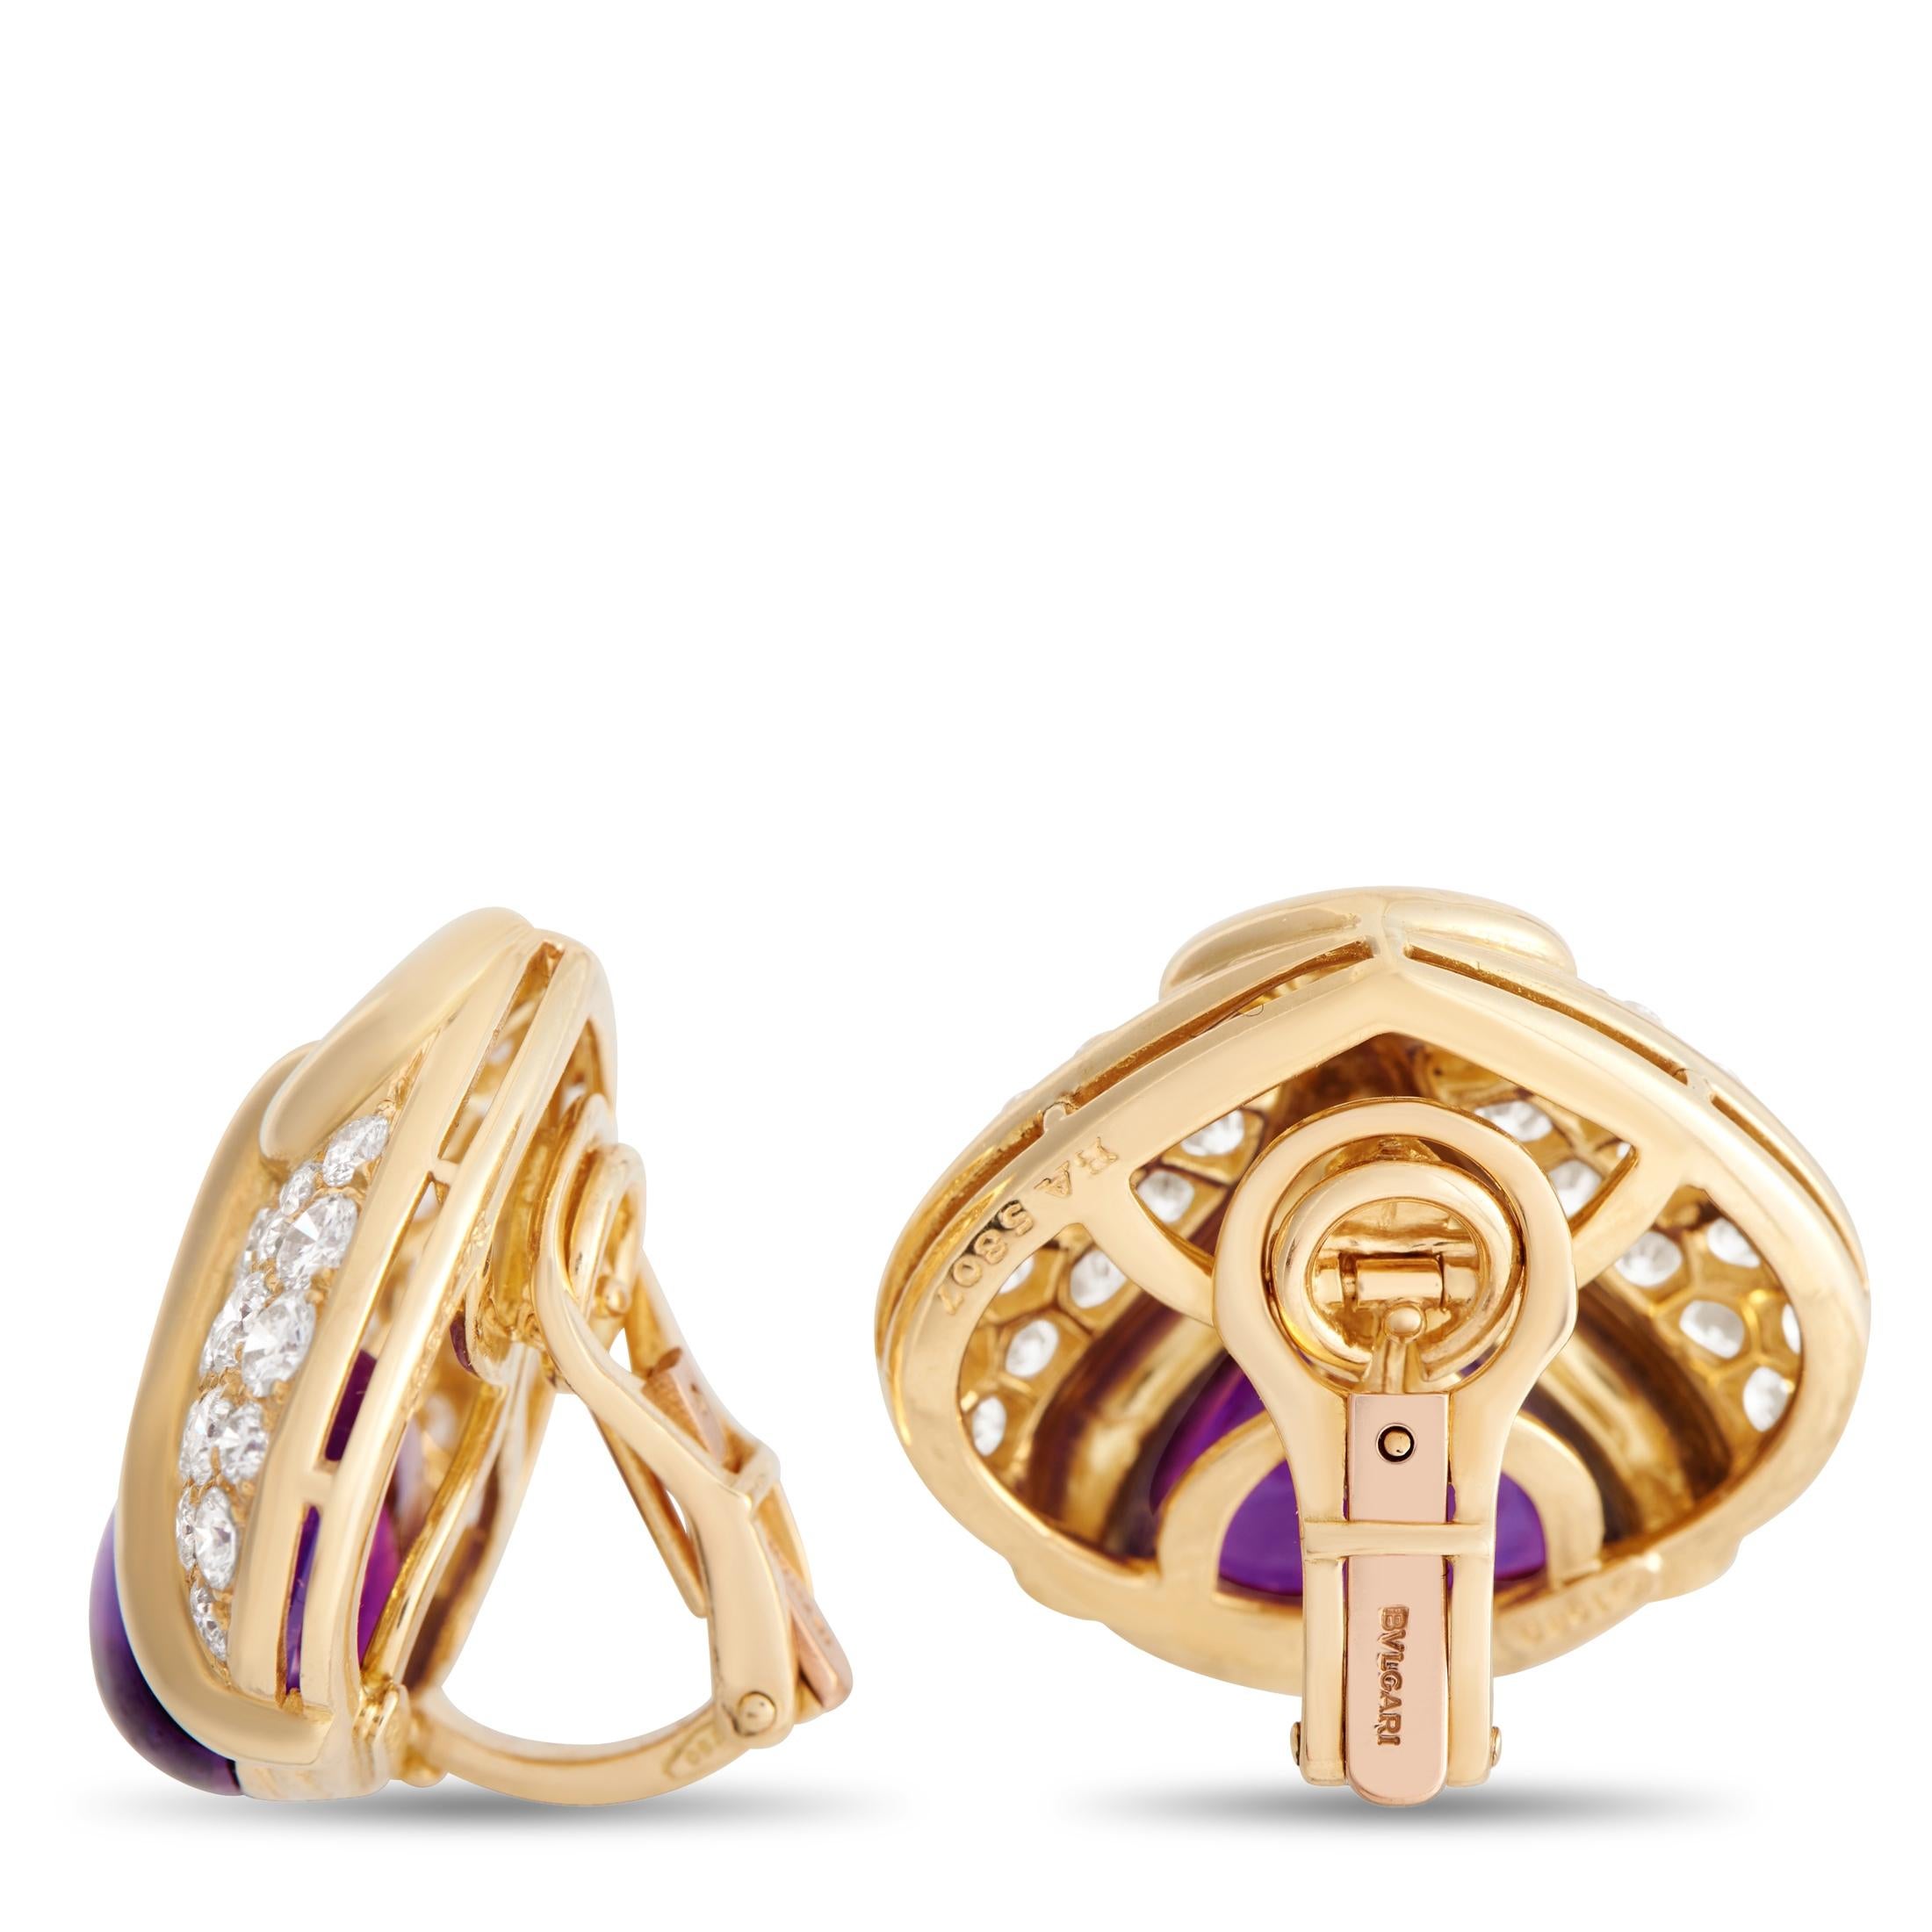 Bold and incredibly opulent in design, these stunning Bvlgari earrings are poised to steal the show. A lustrous 18K Yellow Gold setting measuring 1” round sets the stage for these impeccable luxury earrings, which come complete with 4.0 carats of